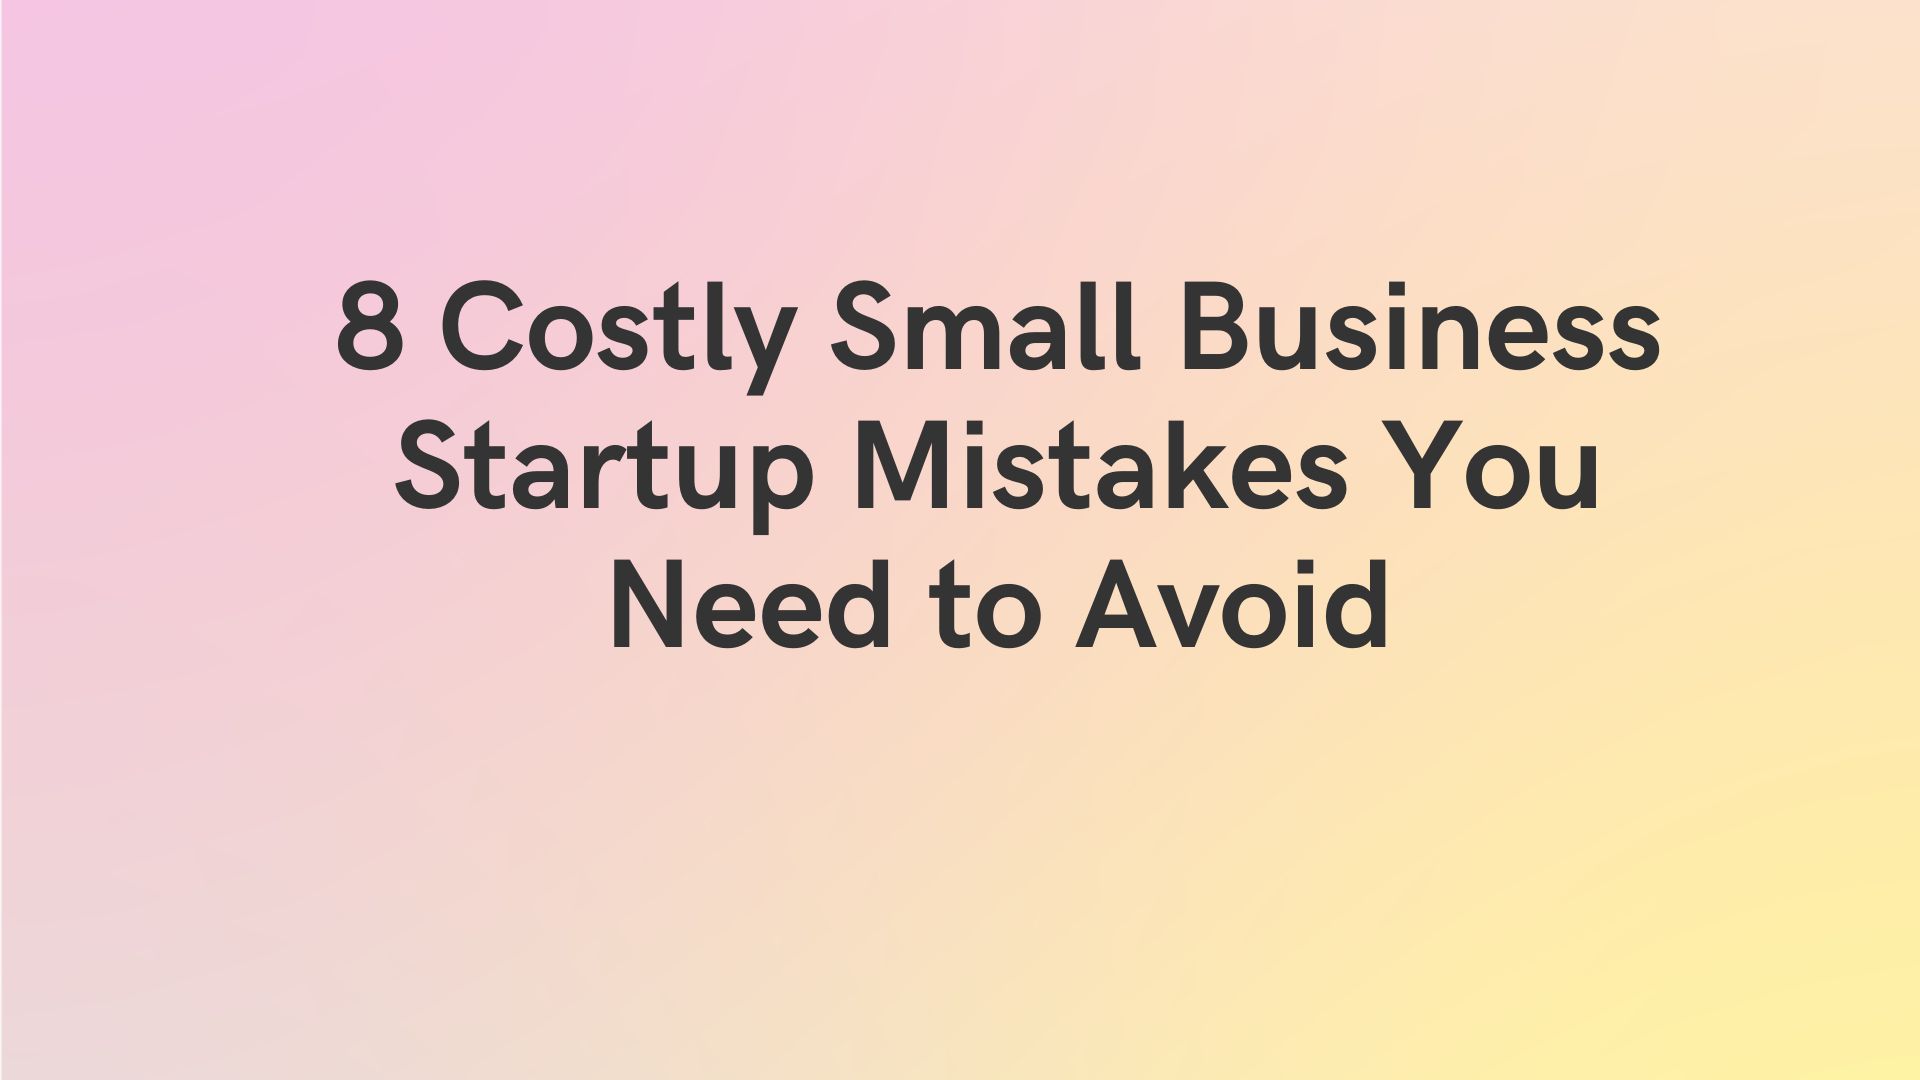 Small Business Startup Mistakes